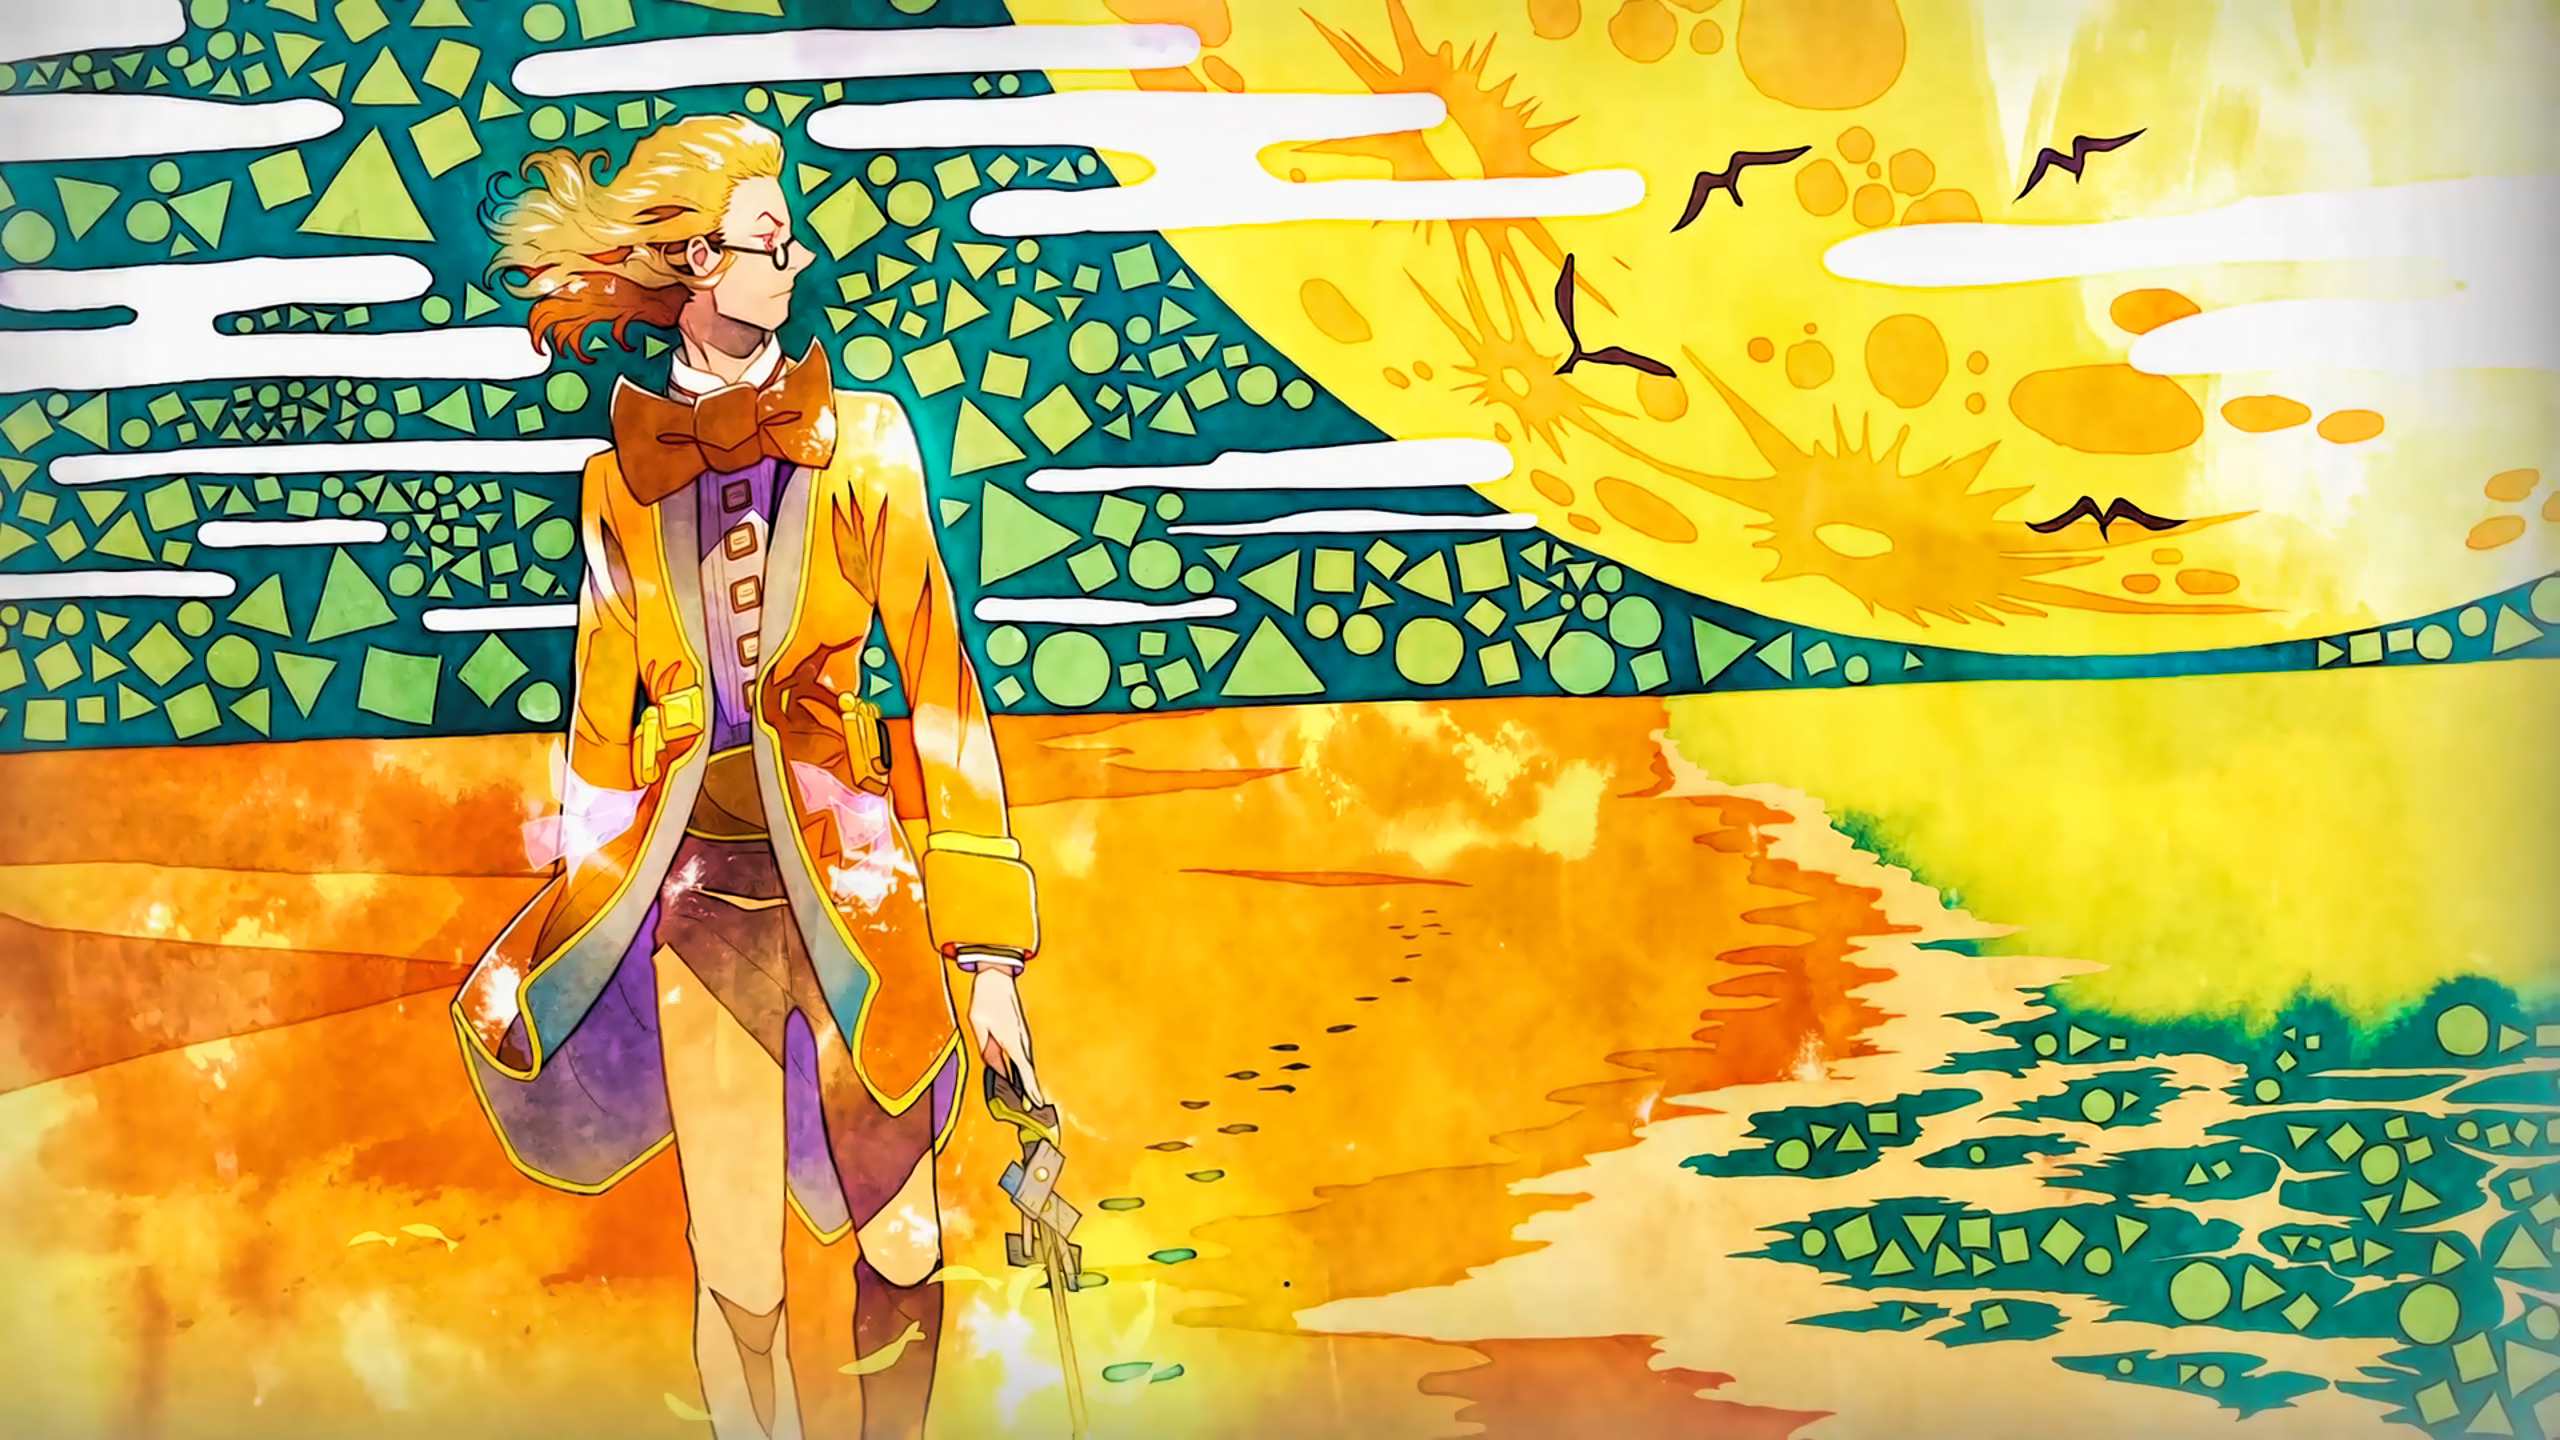 ClassicaLoid Musician Anime Anime Men Blonde Glasses Orange Green Colorful Yellow 2560x1440